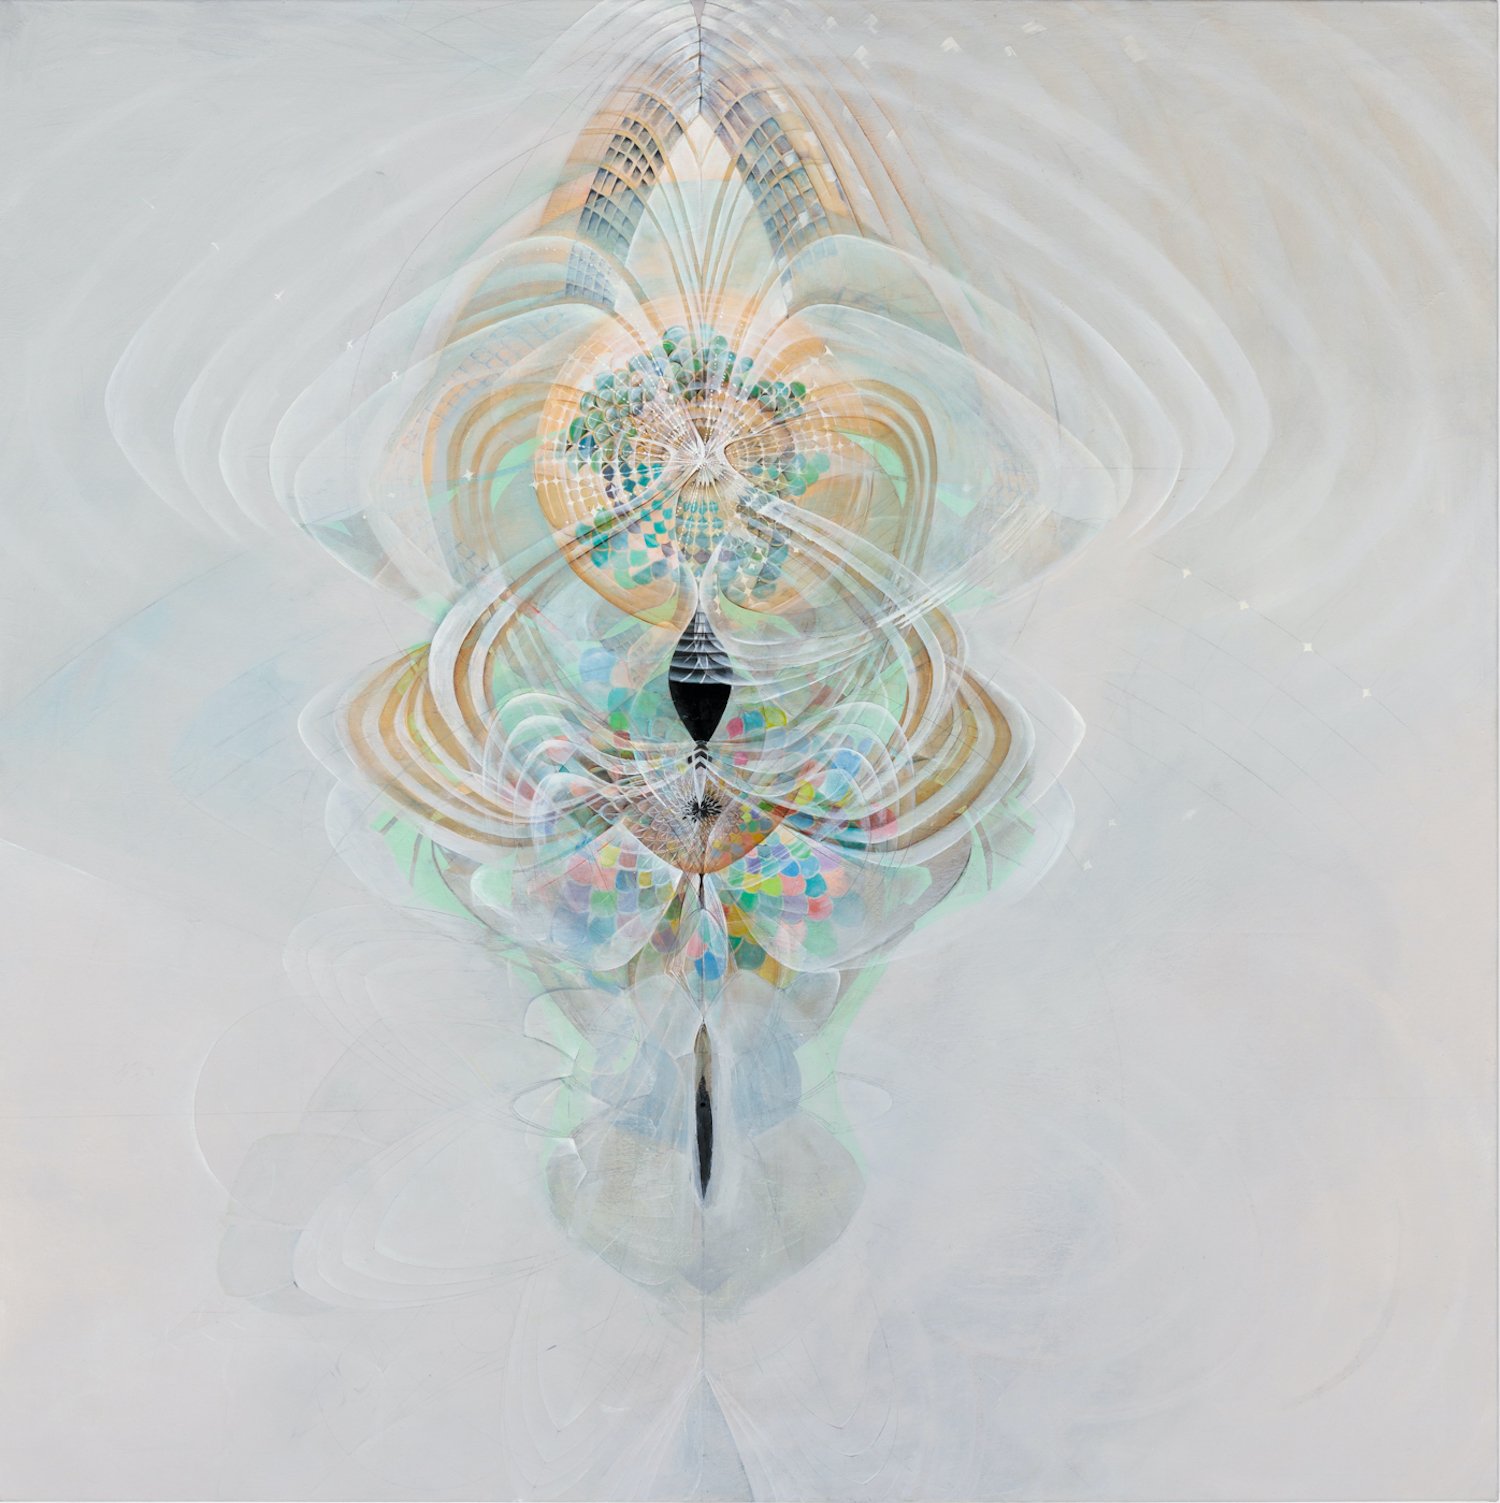   Amy Myers   Brooklyn, NY @amymyersstudio    Hydromelodic Event , 2022  Oil on canvas  60 x 60 inches  Amy Myers’ large-scale drawings and paintings simultaneously reference particle physics, biology, philosophy, and the human mind.  Myers has recei